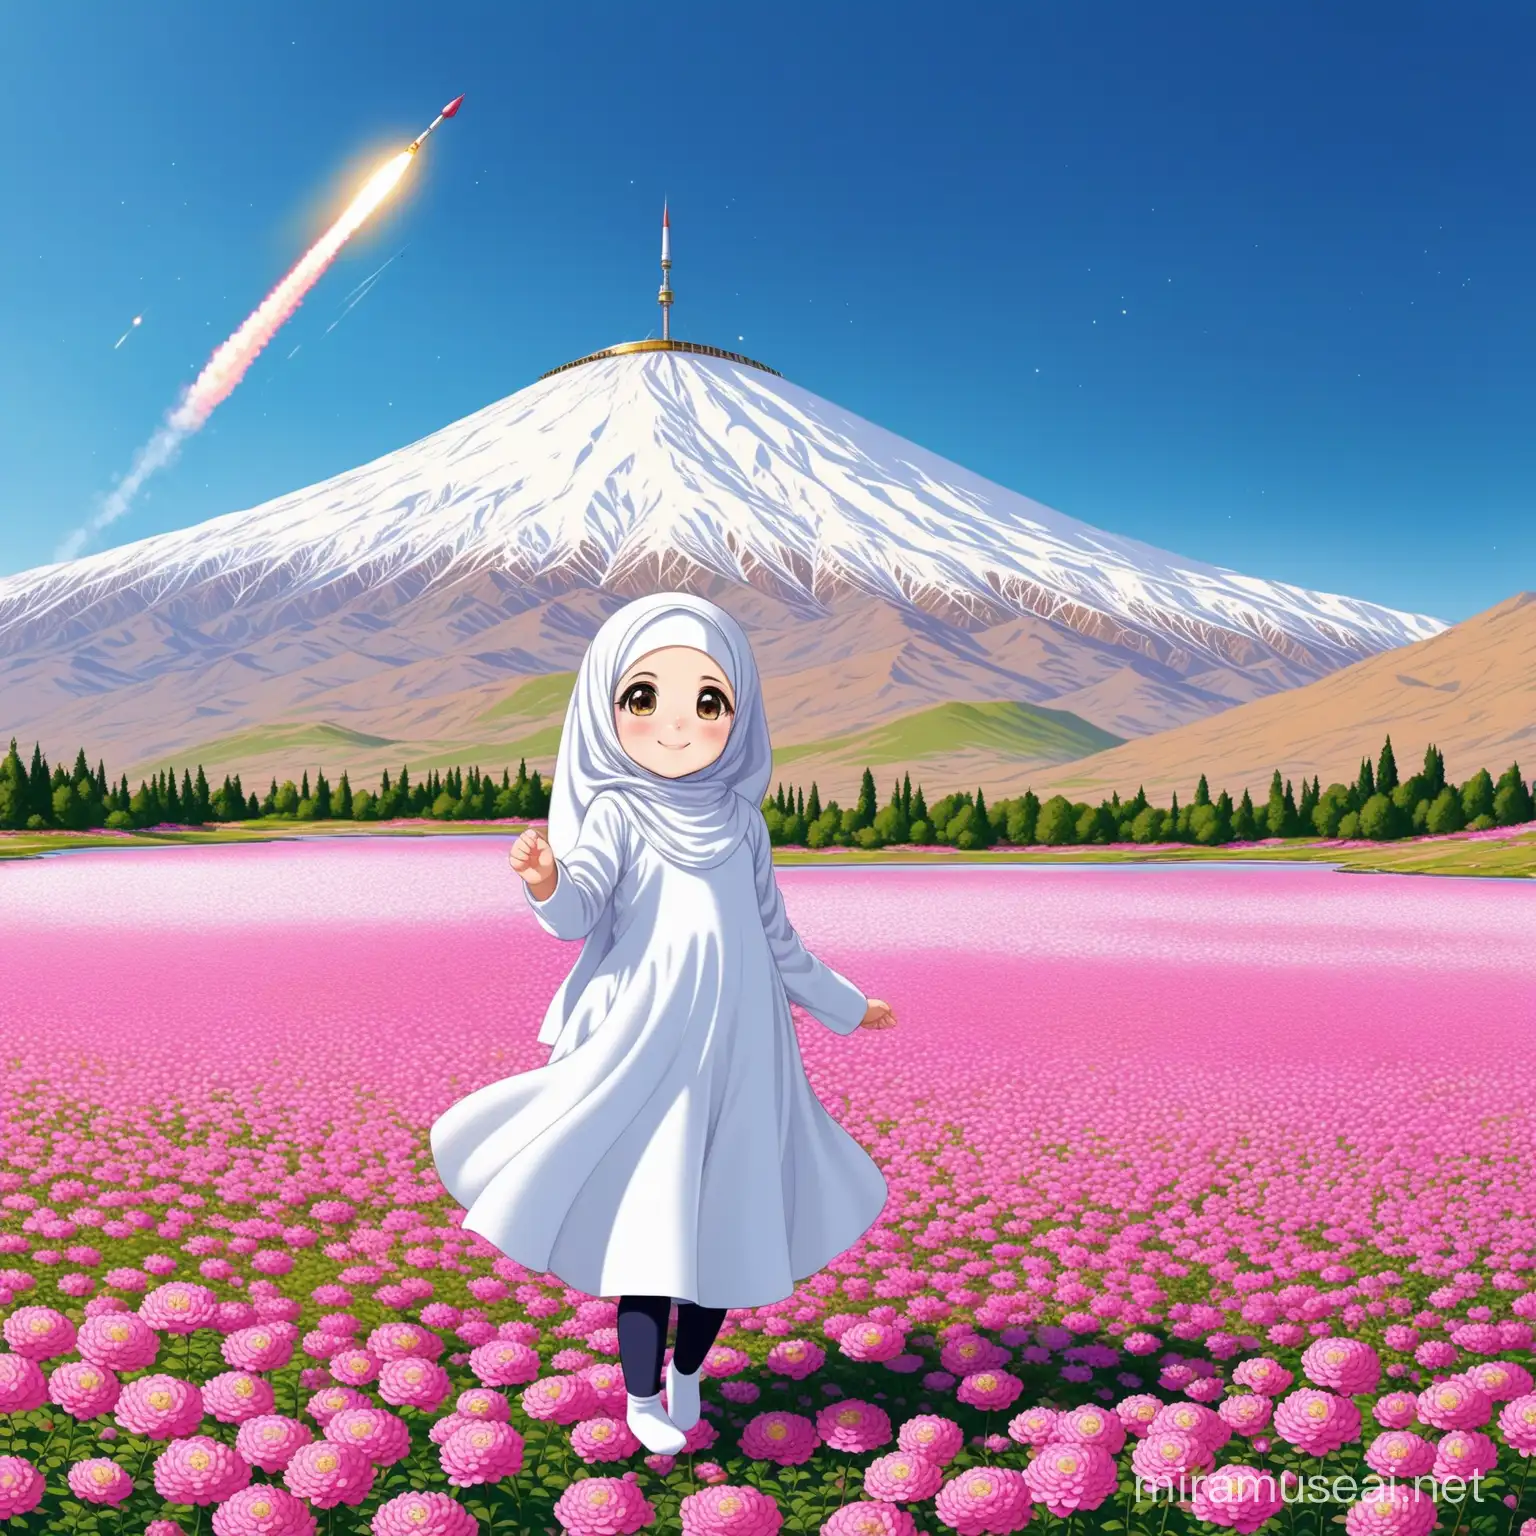 Persian little girl(full height, Muslim, with emphasis no hair out of veil(Hijab), small eyes, bigger nose, white skin, cute, smiling, wearing socks, clothes full of Persian designs).
Atmosphere Damavand mountain, firing satellite to sky, the nice flag of Iran proudly raised in mountain and full of many pink flowers, lake, sparing.